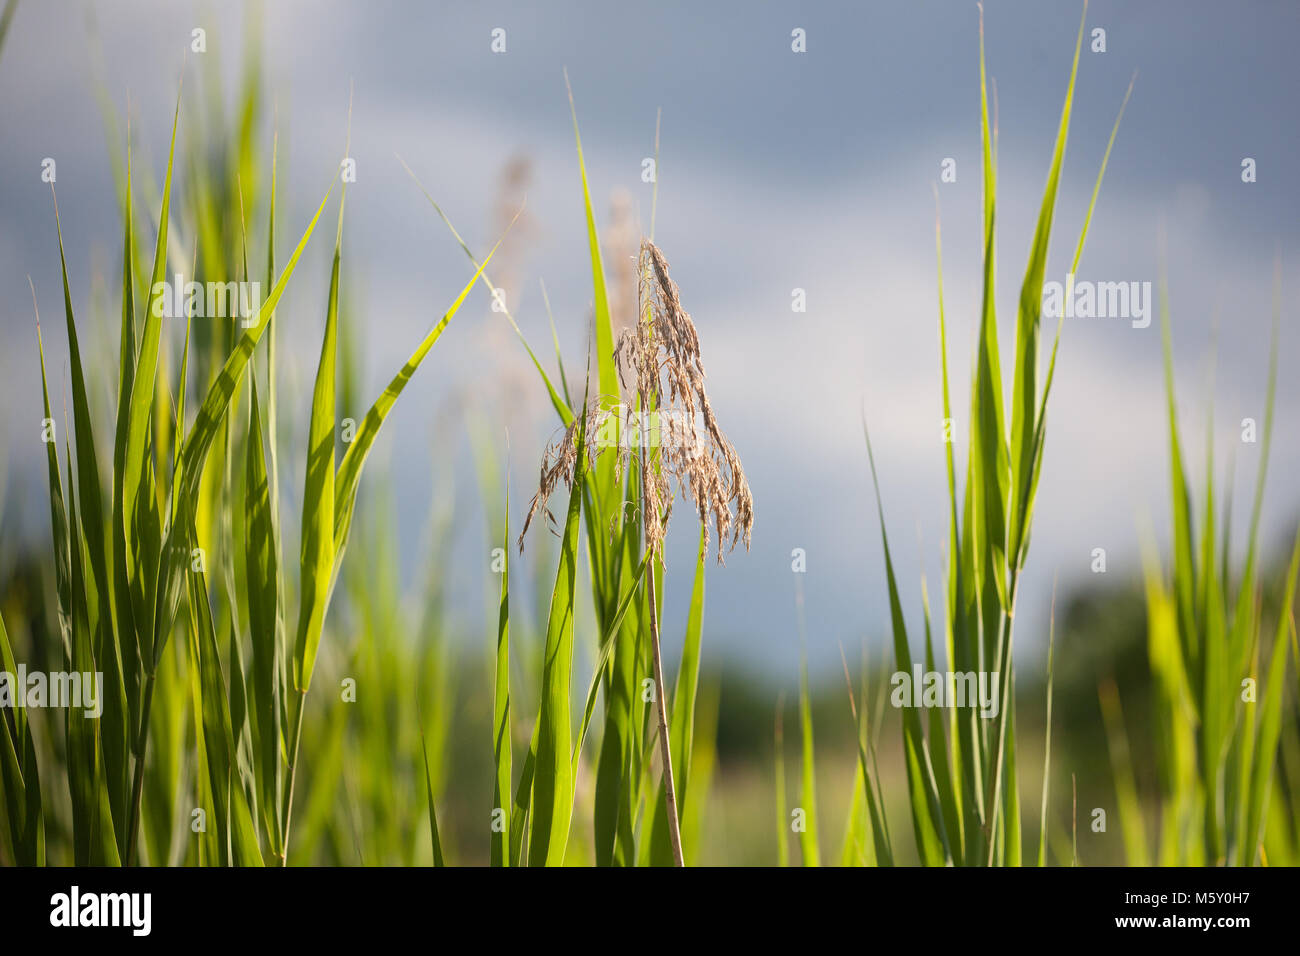 Tall Grass on a Cloudy Blue Sky Summer Day Stock Photo